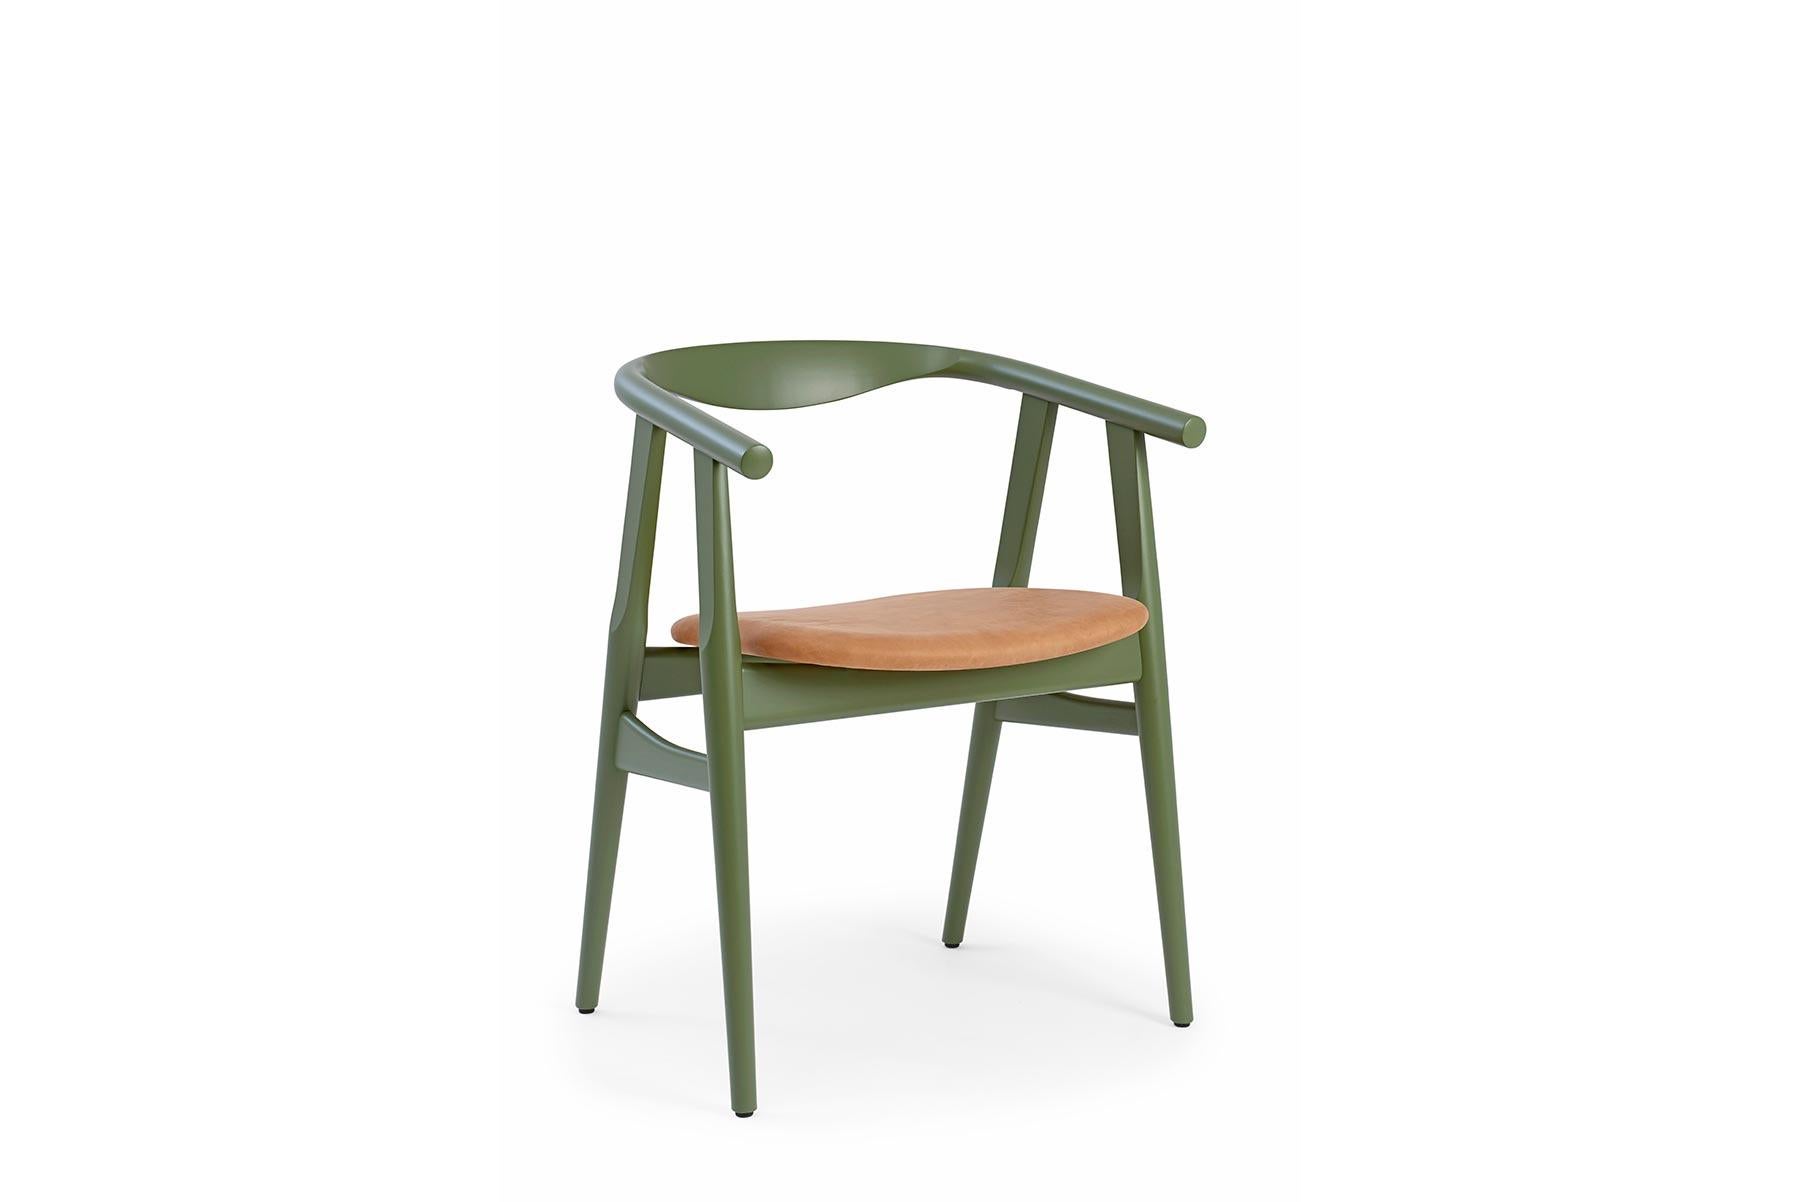 Designed by Hans Wegner in 1970, the GE 525 dining chair offers a beautifully rounded design sculpted in wood. The chair is hand built at GETAMA’s factory in Gedsted, Denmark by skilled cabinetmakers using traditional Scandinavian